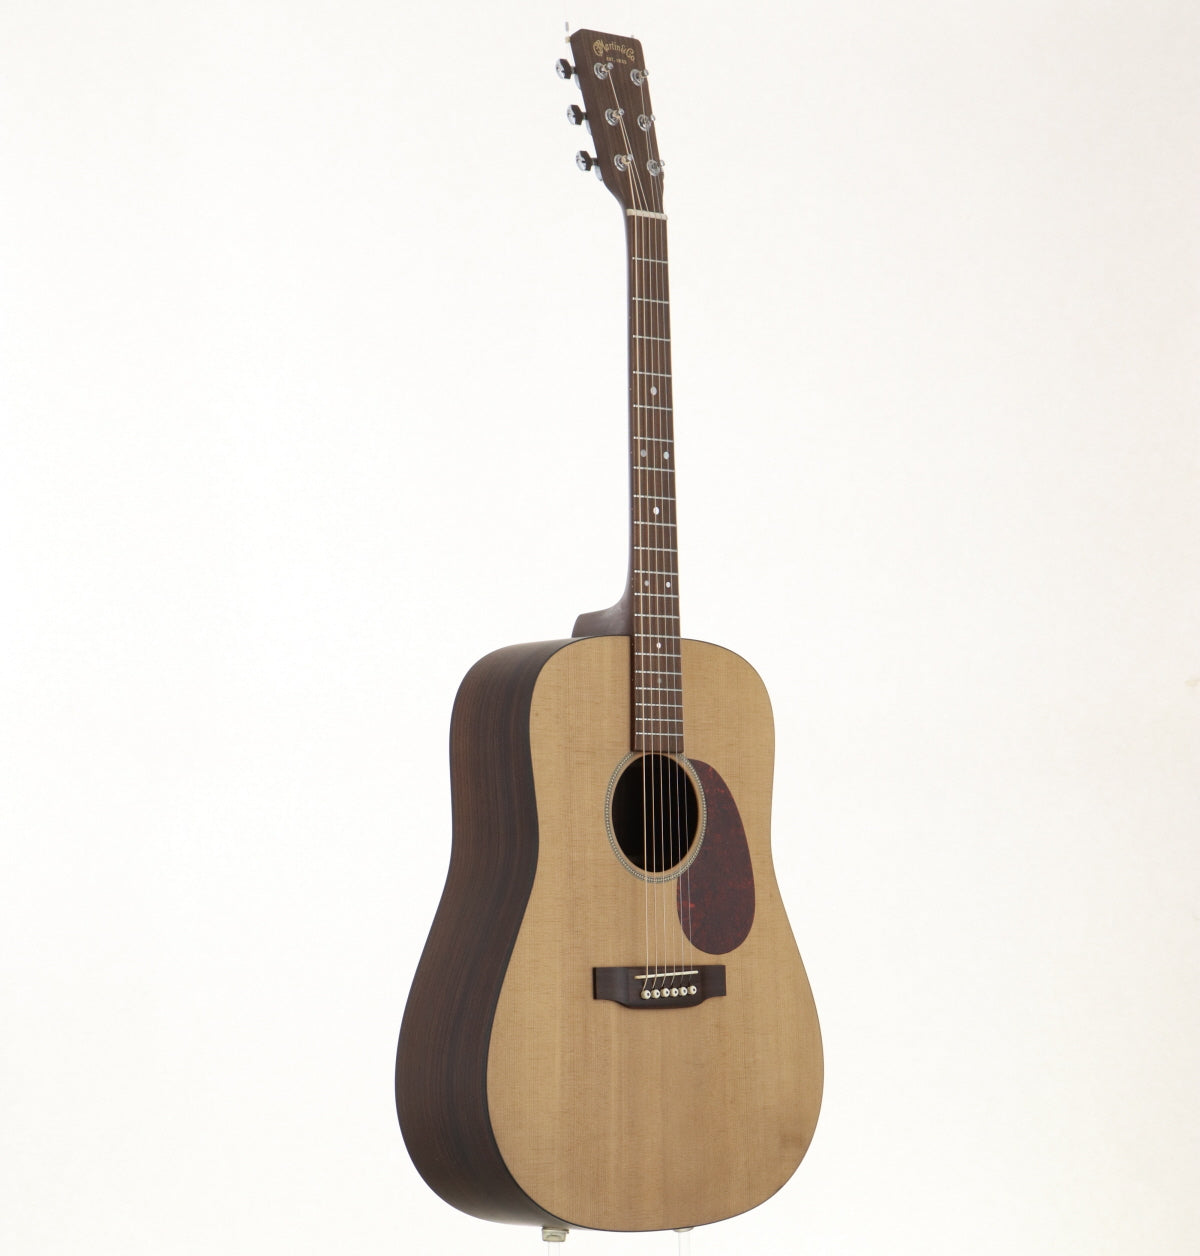 [SN 919438] USED Martin / DR Rosewood [2003 / Real Image] Martin Martin Acoustic Guitar Acoustic Guitar [08]